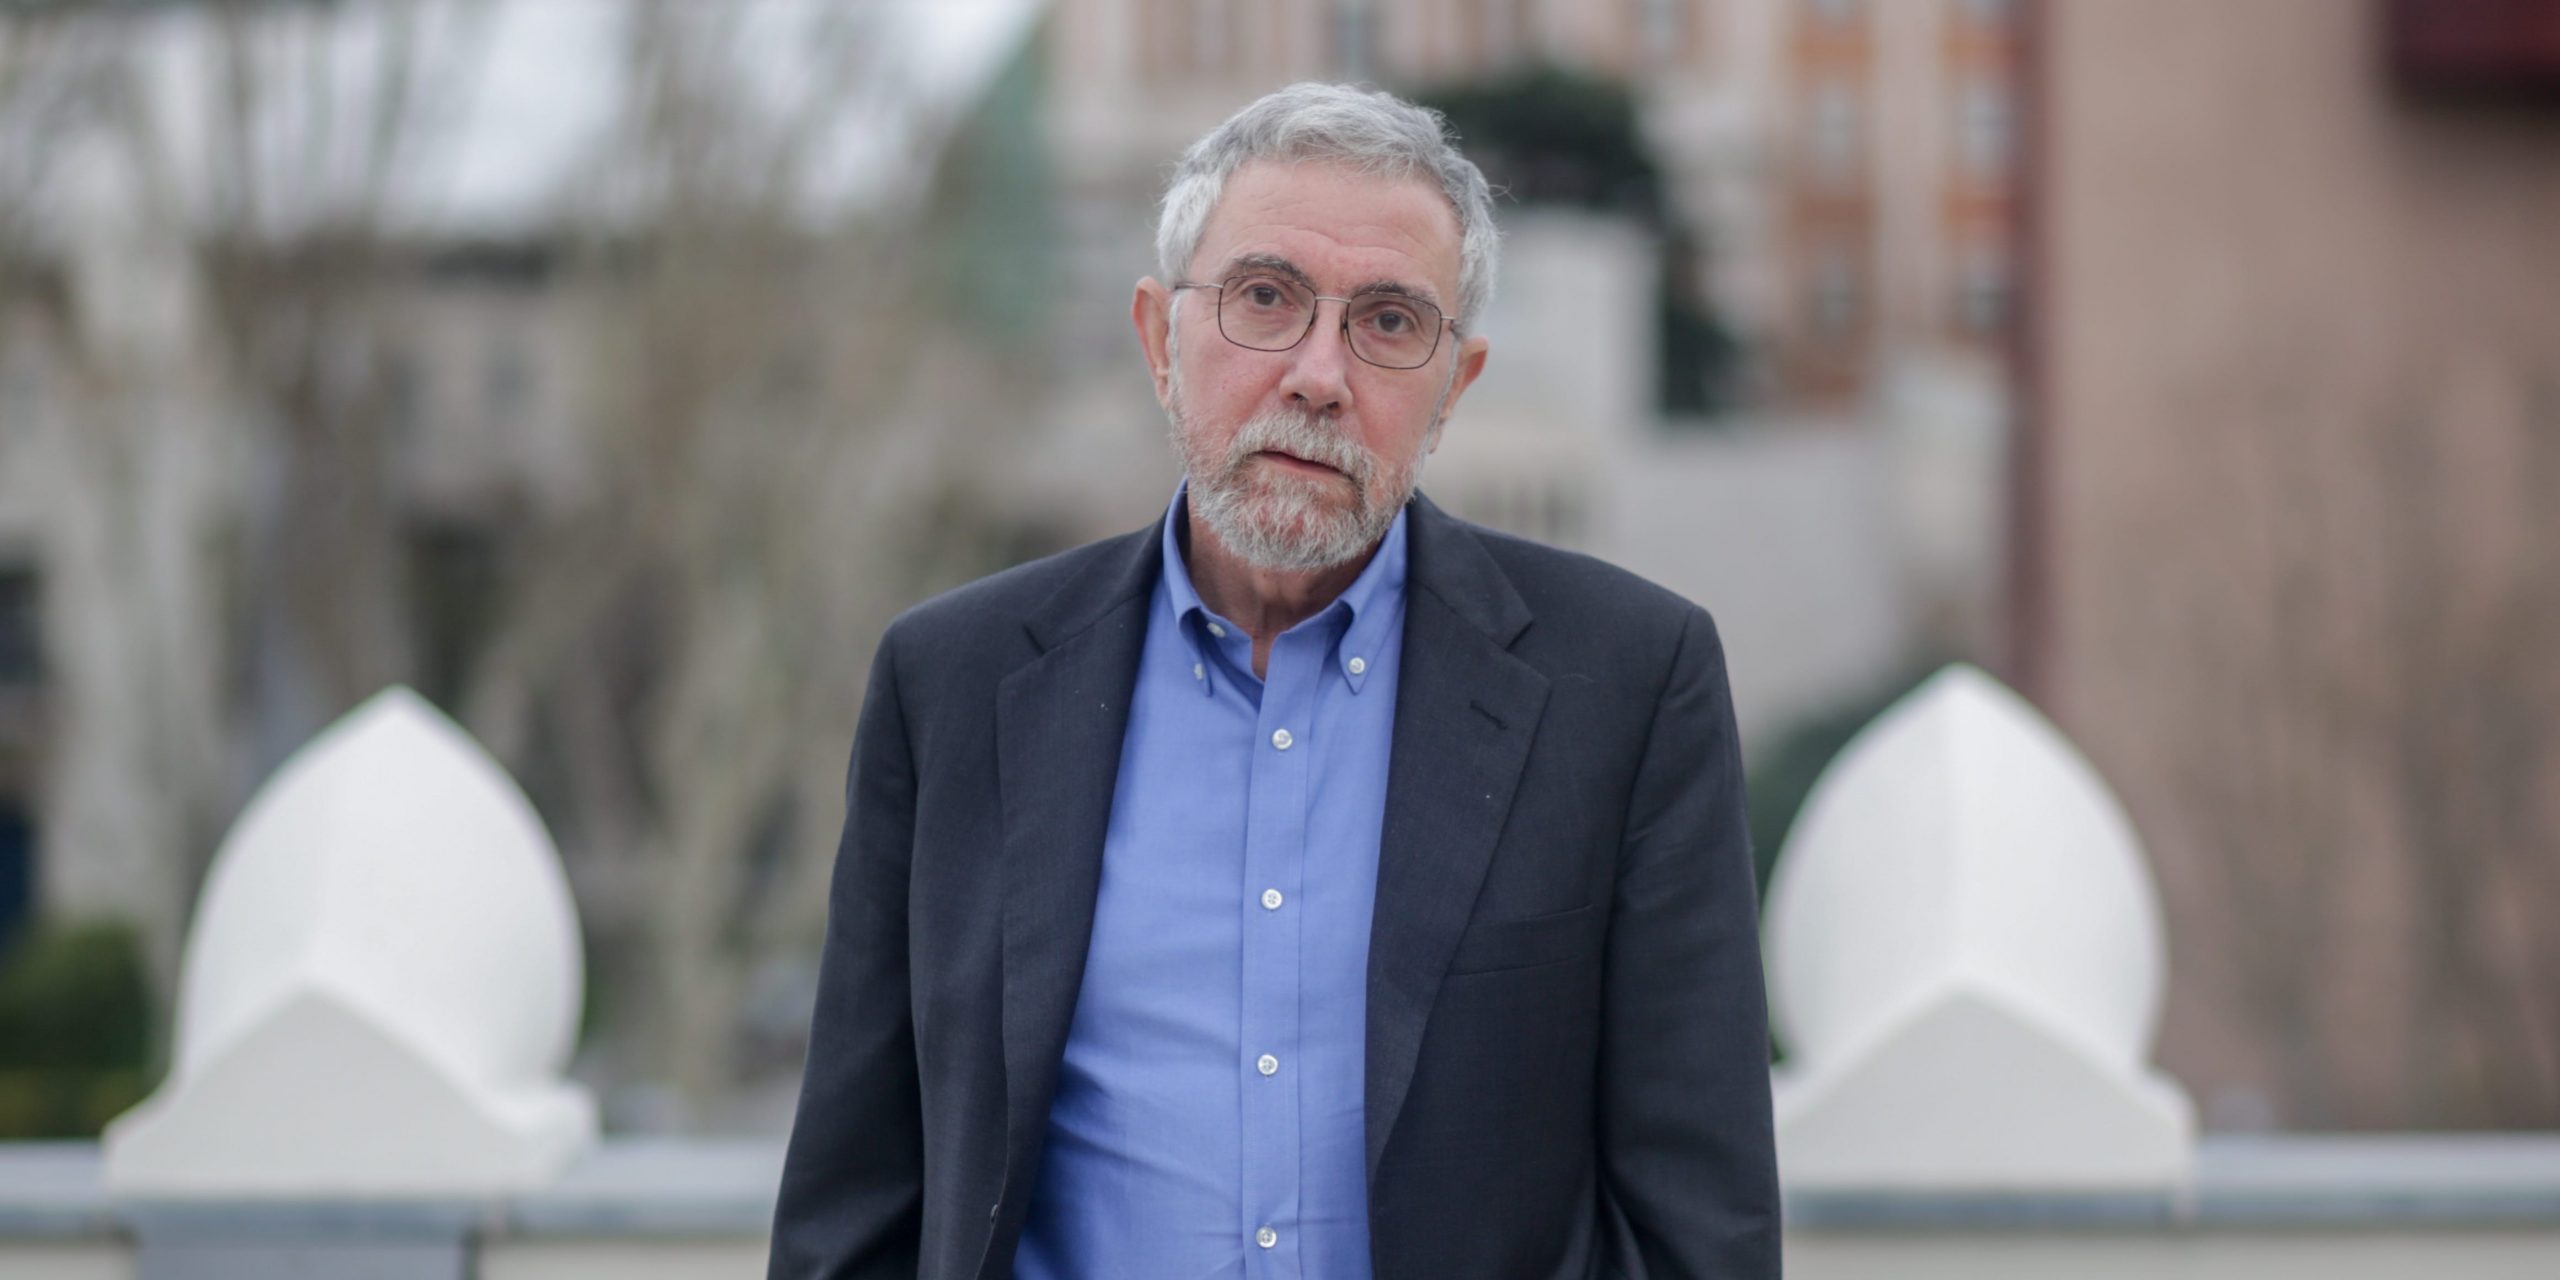 The North American economist Paul Krugman, poses after an interview with Europa Press at the Rafael del Pino Foundation on February 17, 2020 in Madrid, Spain.